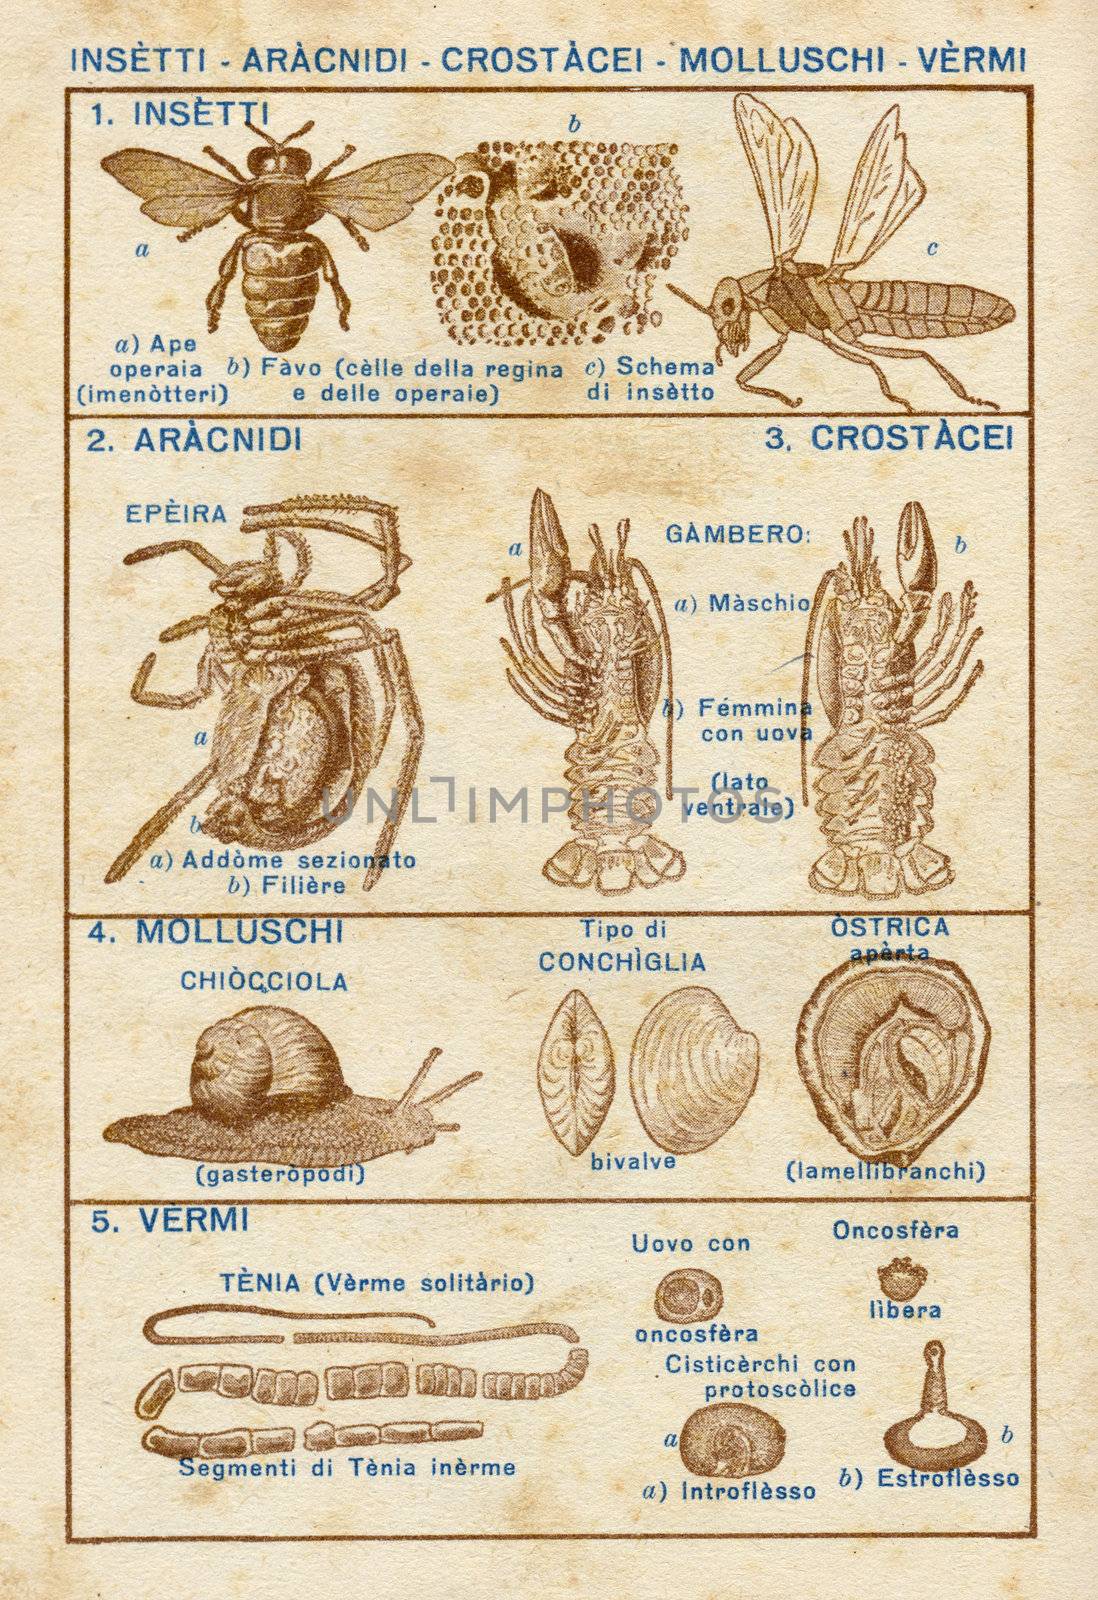 ITALY - CIRCA 1940: Vintage illustration of insects, circa 1940 in Italy